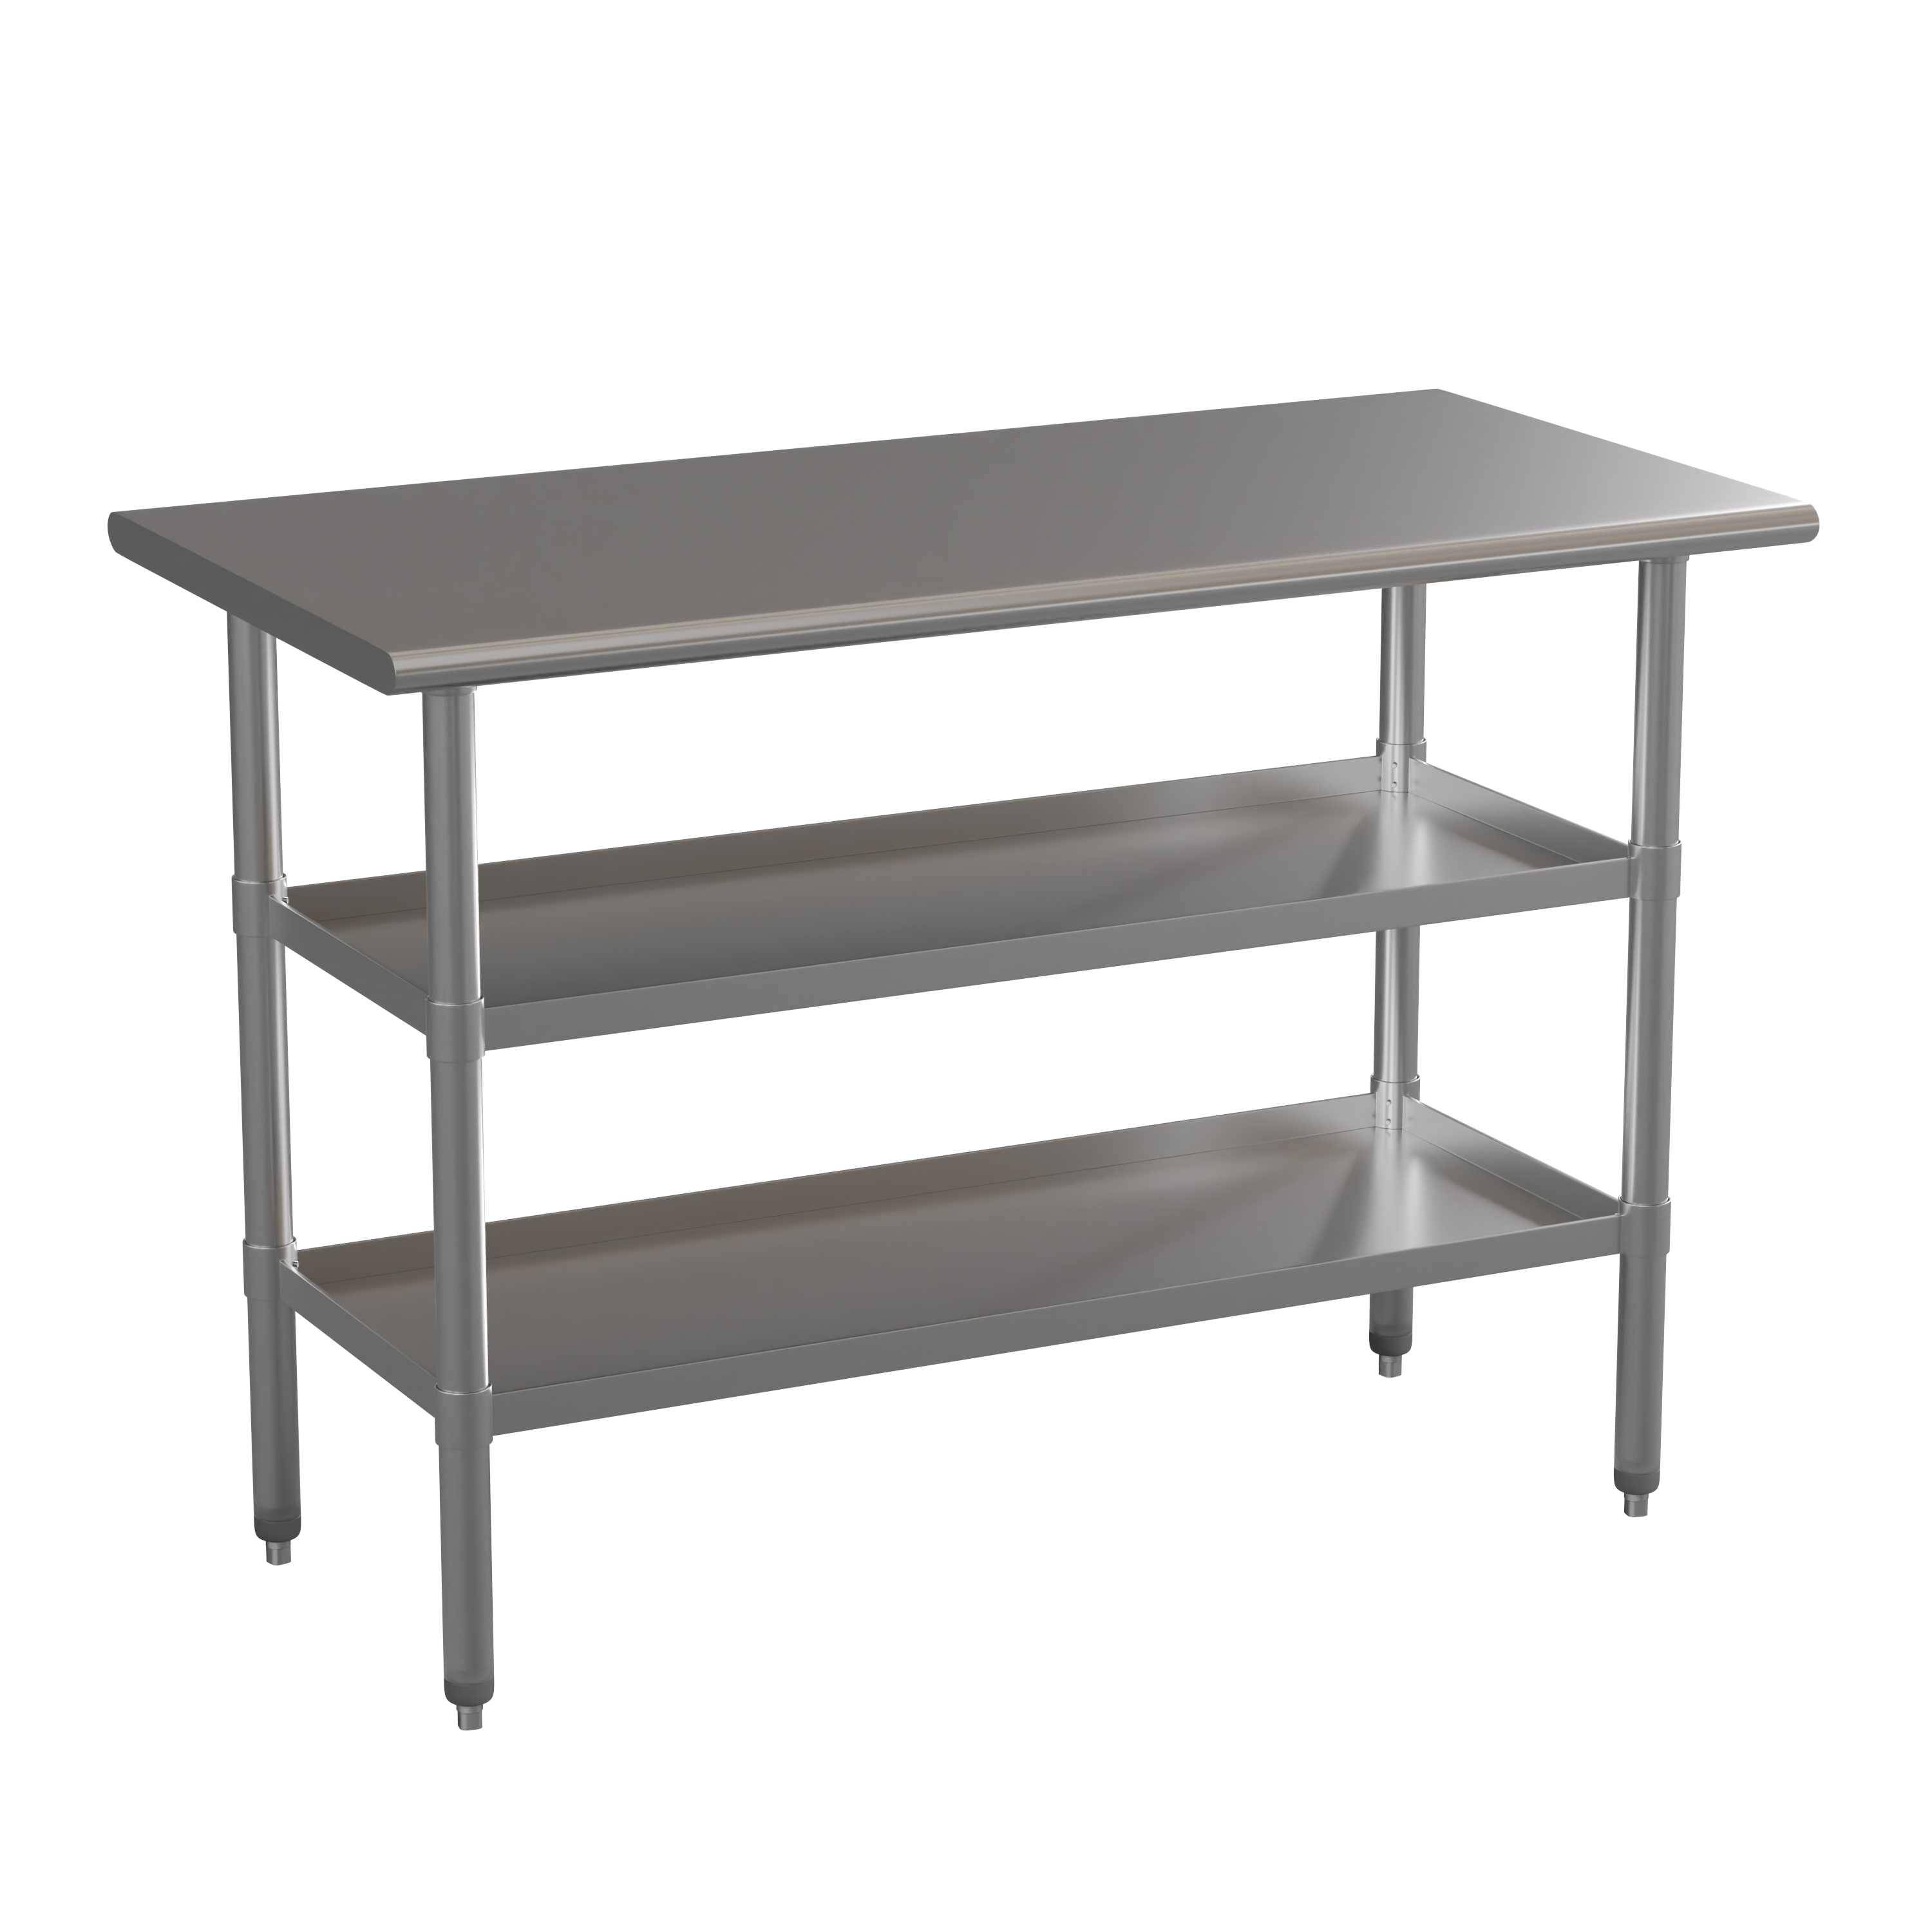 Flash Furniture NH-WT-GU-2448-GG Stainless Steel 18 Gauge Work Table with 2 Undershelves, 48"W x 24"D x 34.5"H